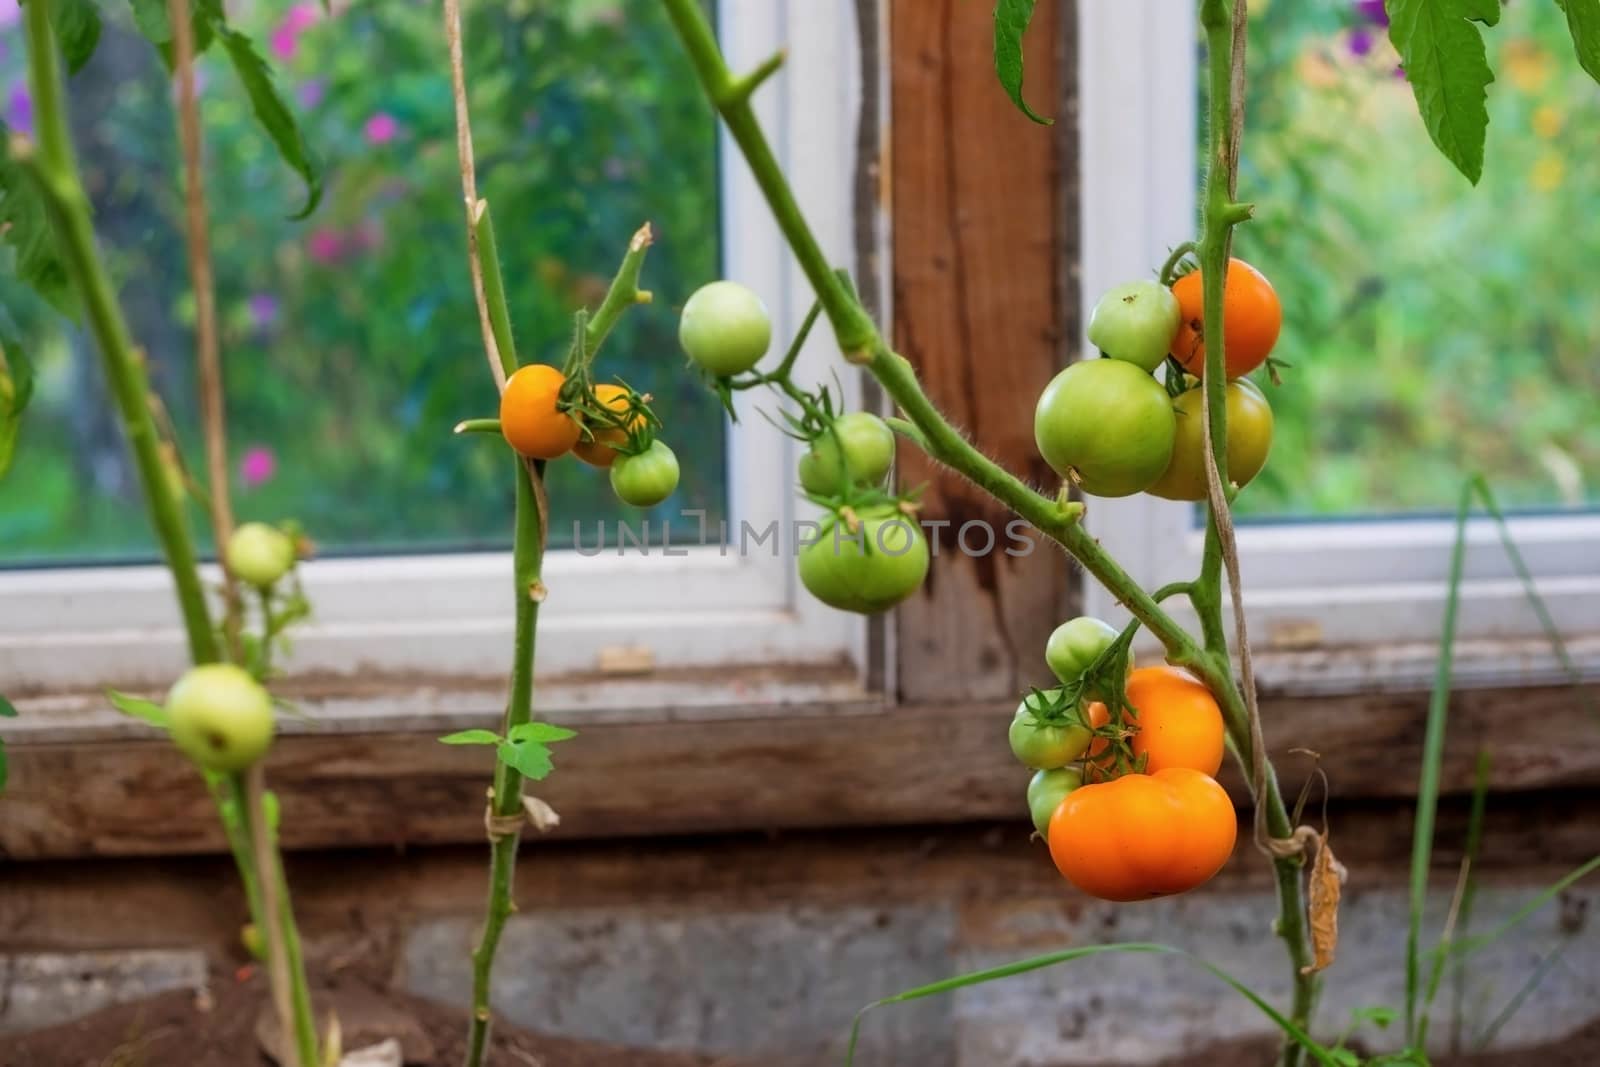 Tomatoes in the garden,Vegetable garden with plants of red tomatoes. by galinasharapova